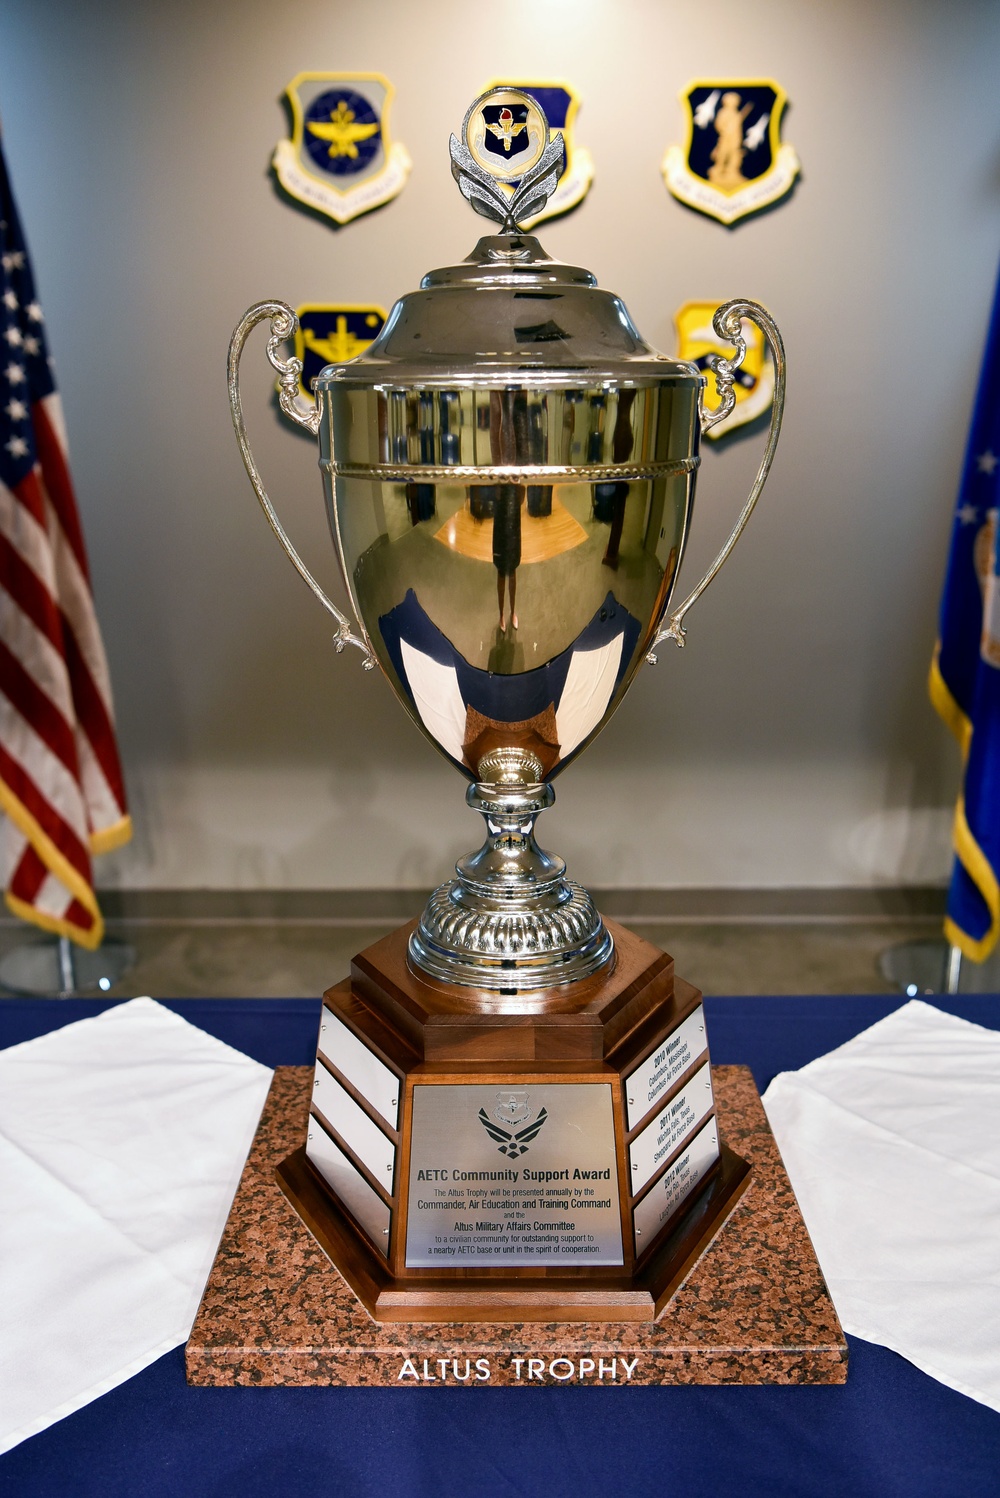 65 years of continued community support: LRAFB Community Council presented Altus Trophy